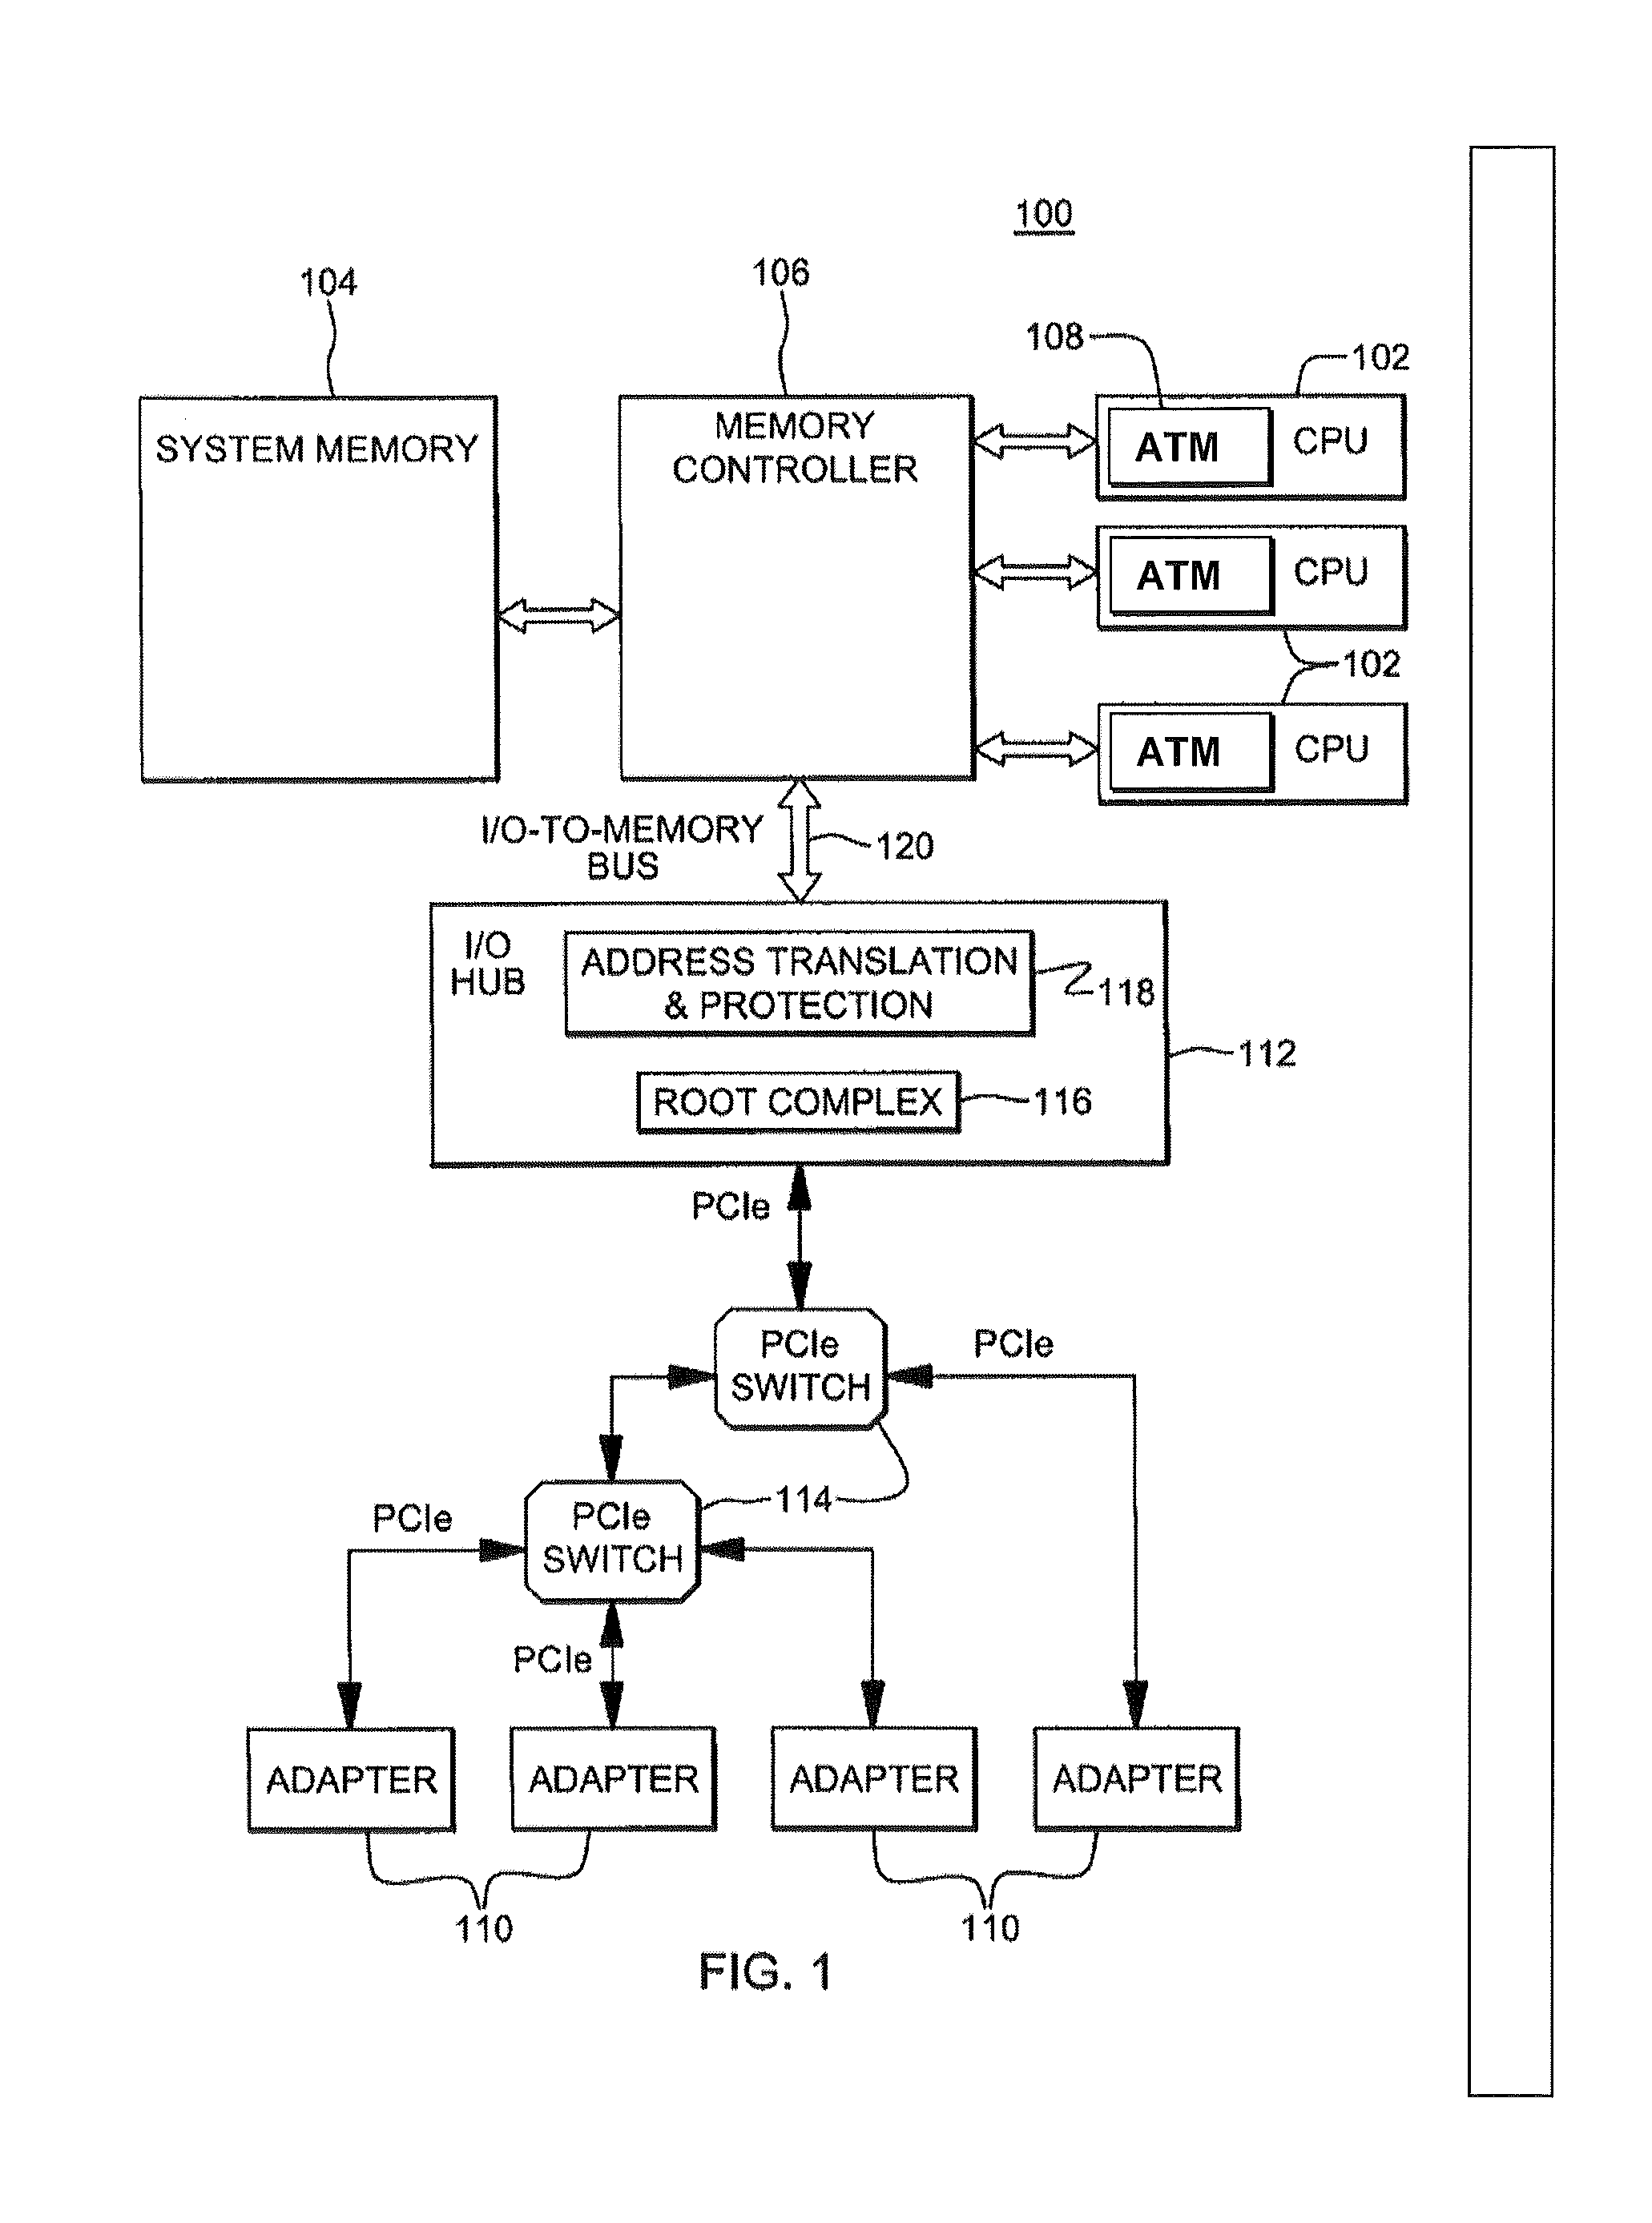 Scalable I/O adapter function level error detection, isolation, and reporting